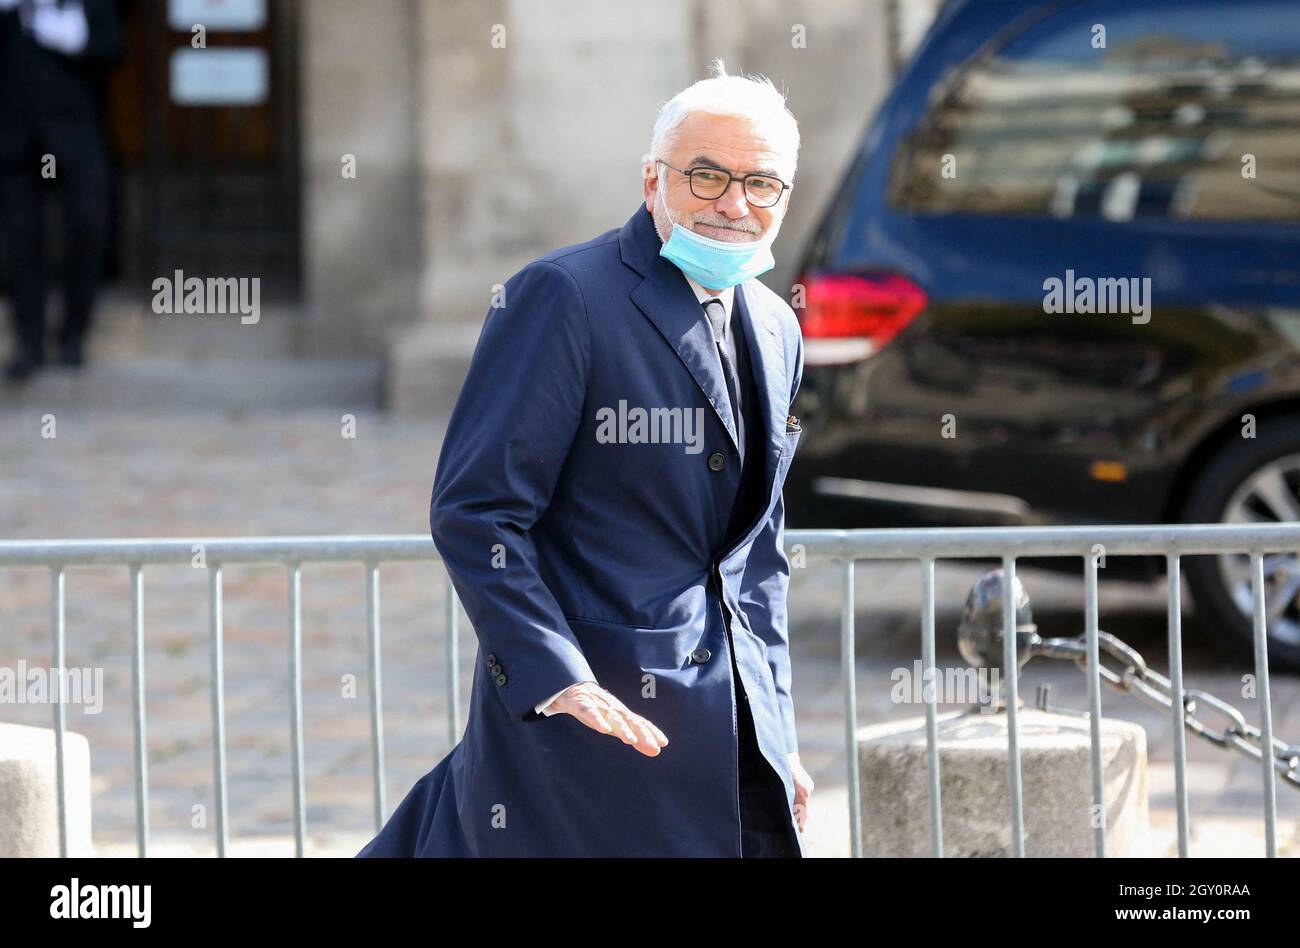 Pascal Praud during a tribute mass for French tycoon Bernard Tapie at Saint  Germain des Pres church in Paris, France on October 6, 2021. The funeral  will be held on October 8